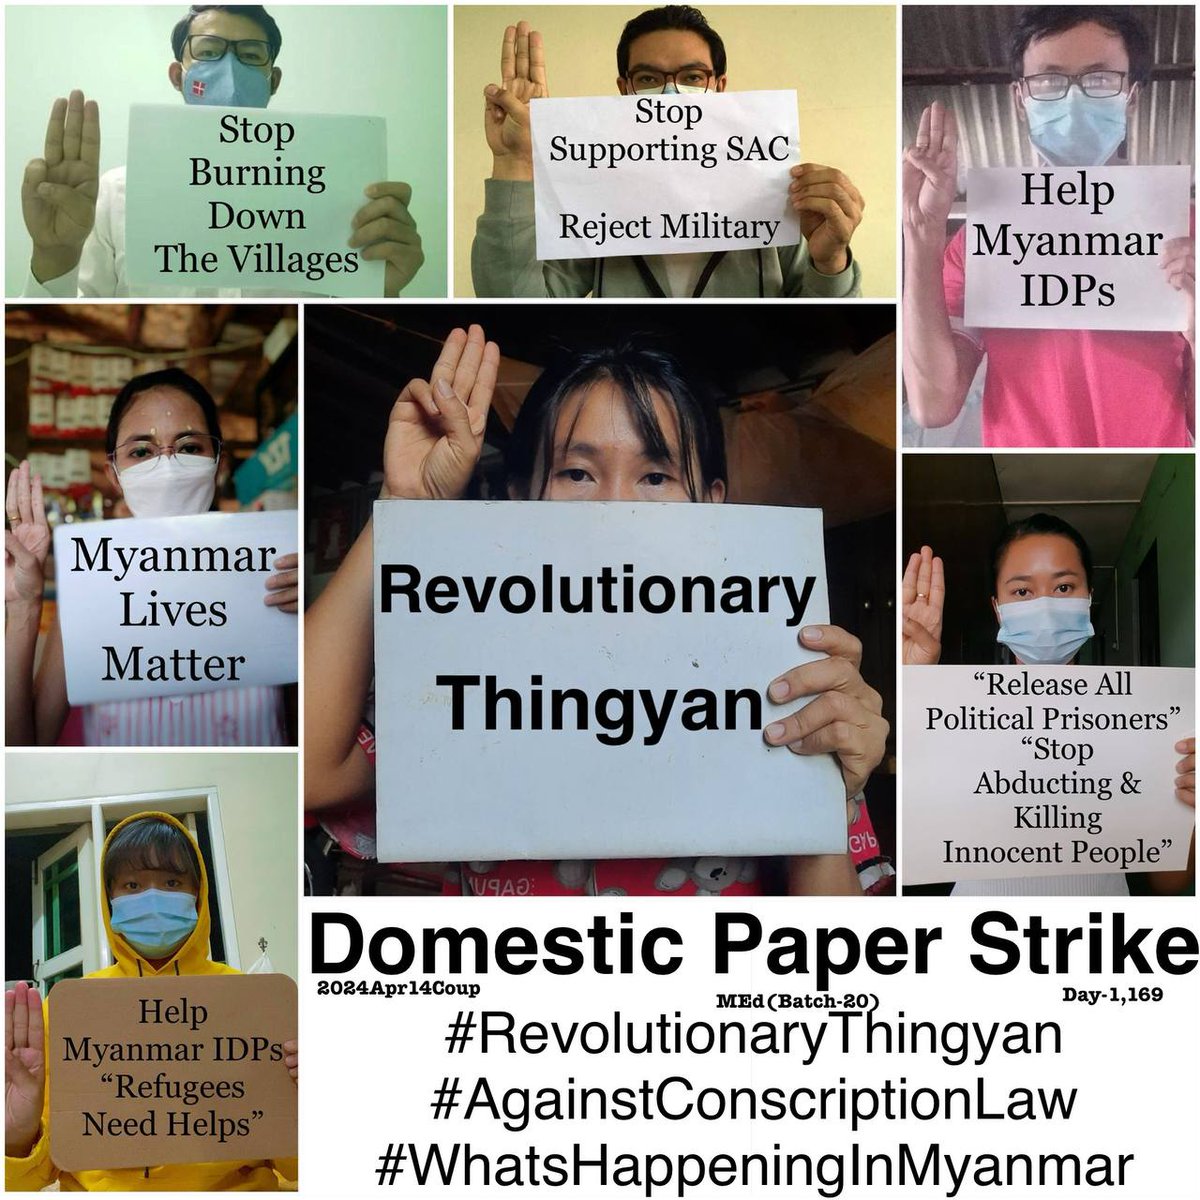 Daily anti-coup revolutionary domestic strike by pro-democracy CDMer teachers from Sagaing University of Education as 1,169th day. #2024Apr14Coup #AgainstConscriptionLaw #WhatsHappeningInMyanmar